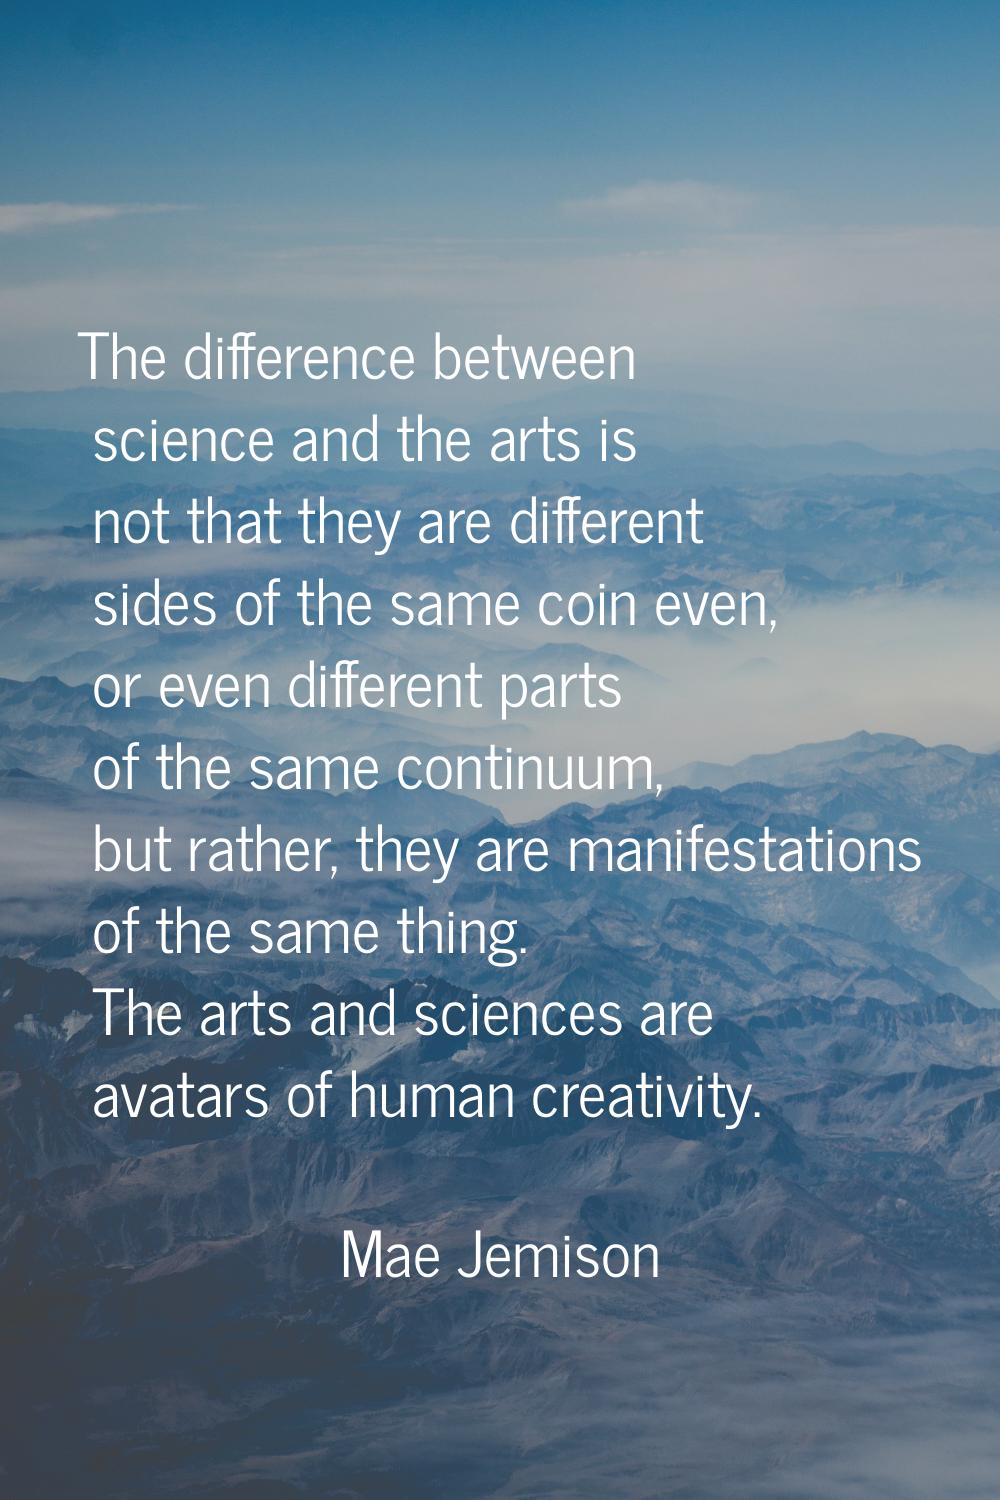 The difference between science and the arts is not that they are different sides of the same coin e